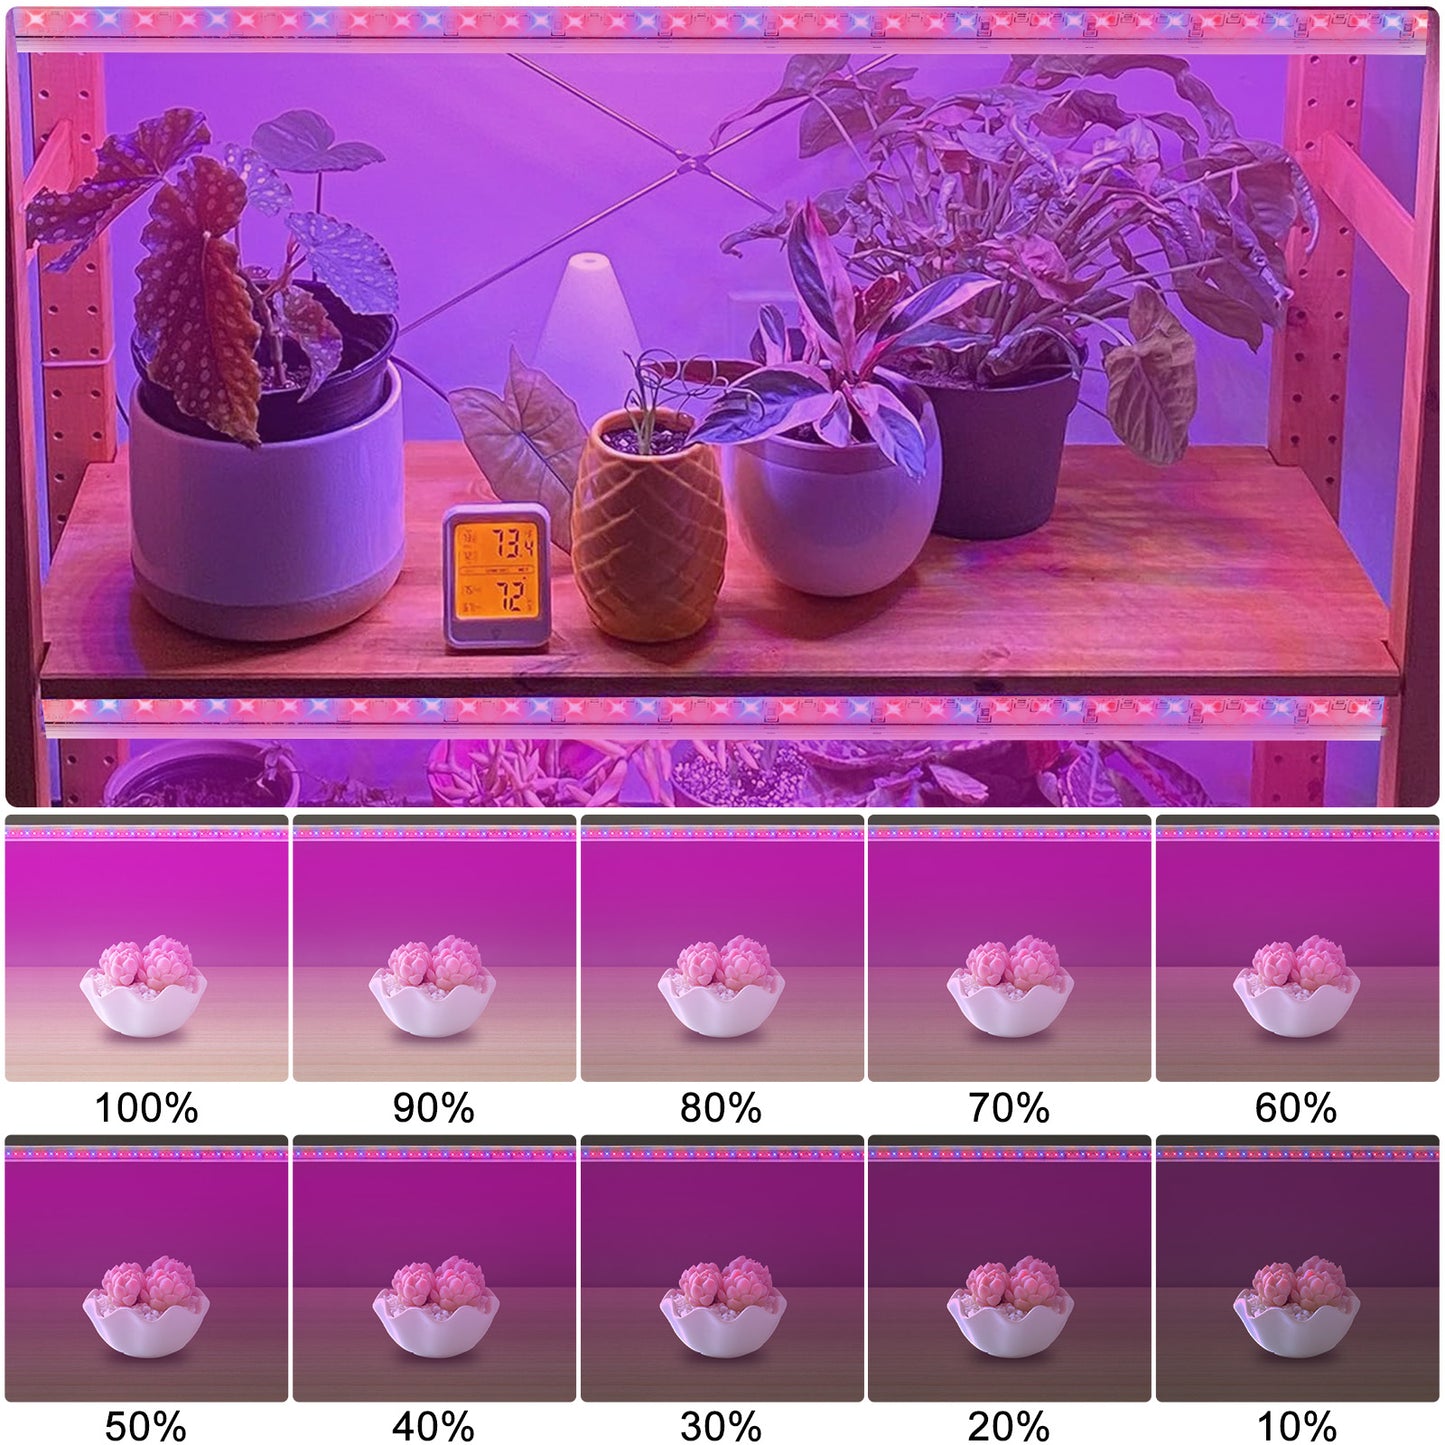 LED Plant Grow Light Strips - Full Spectrum Light Two Strips for Indoor Plants, Succulents, Seedlings, and Greenhouse Gardens